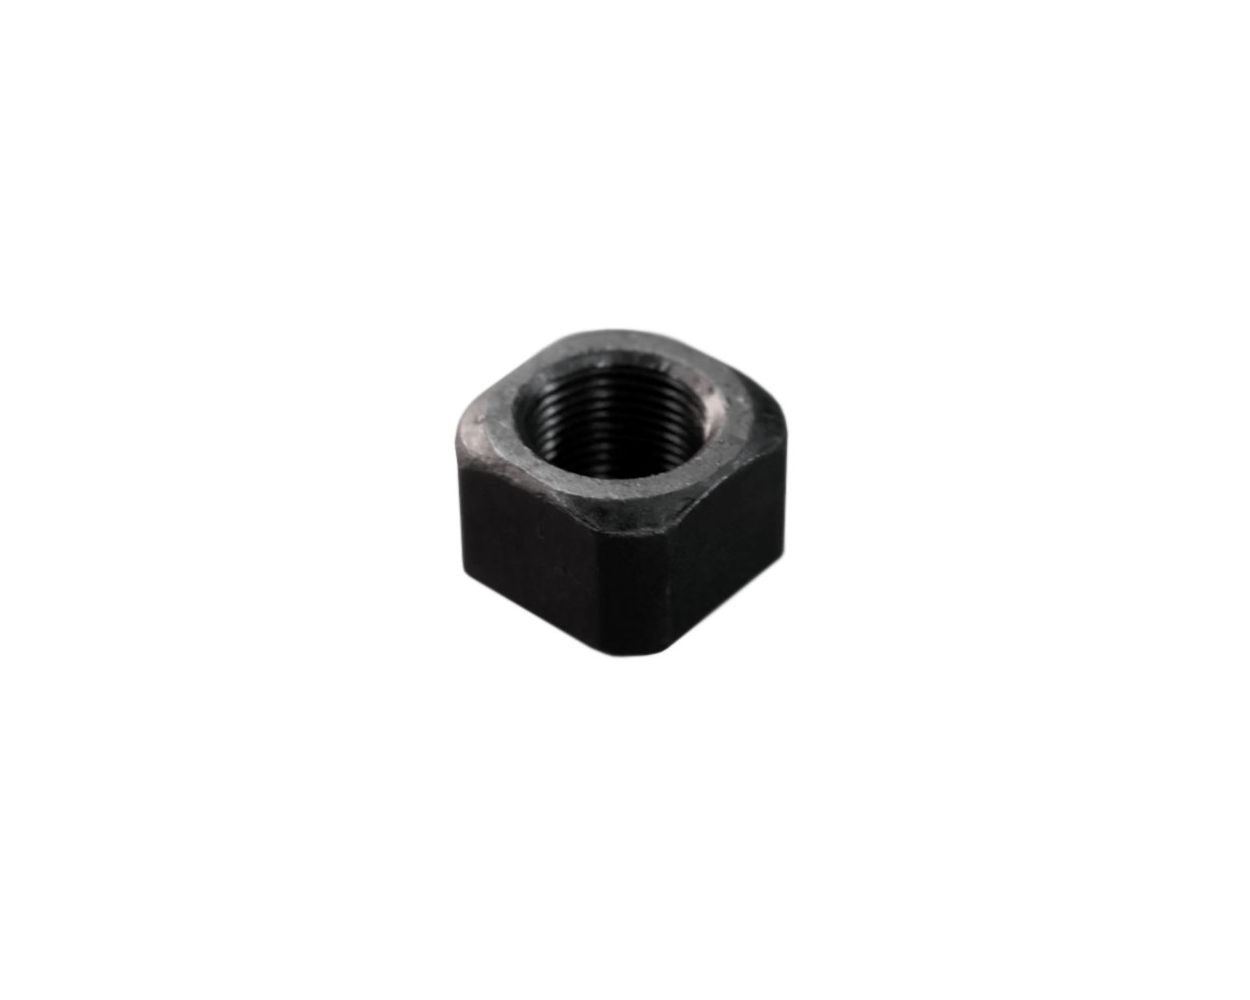 IN1286 B2/D2 1/2-20 track nut